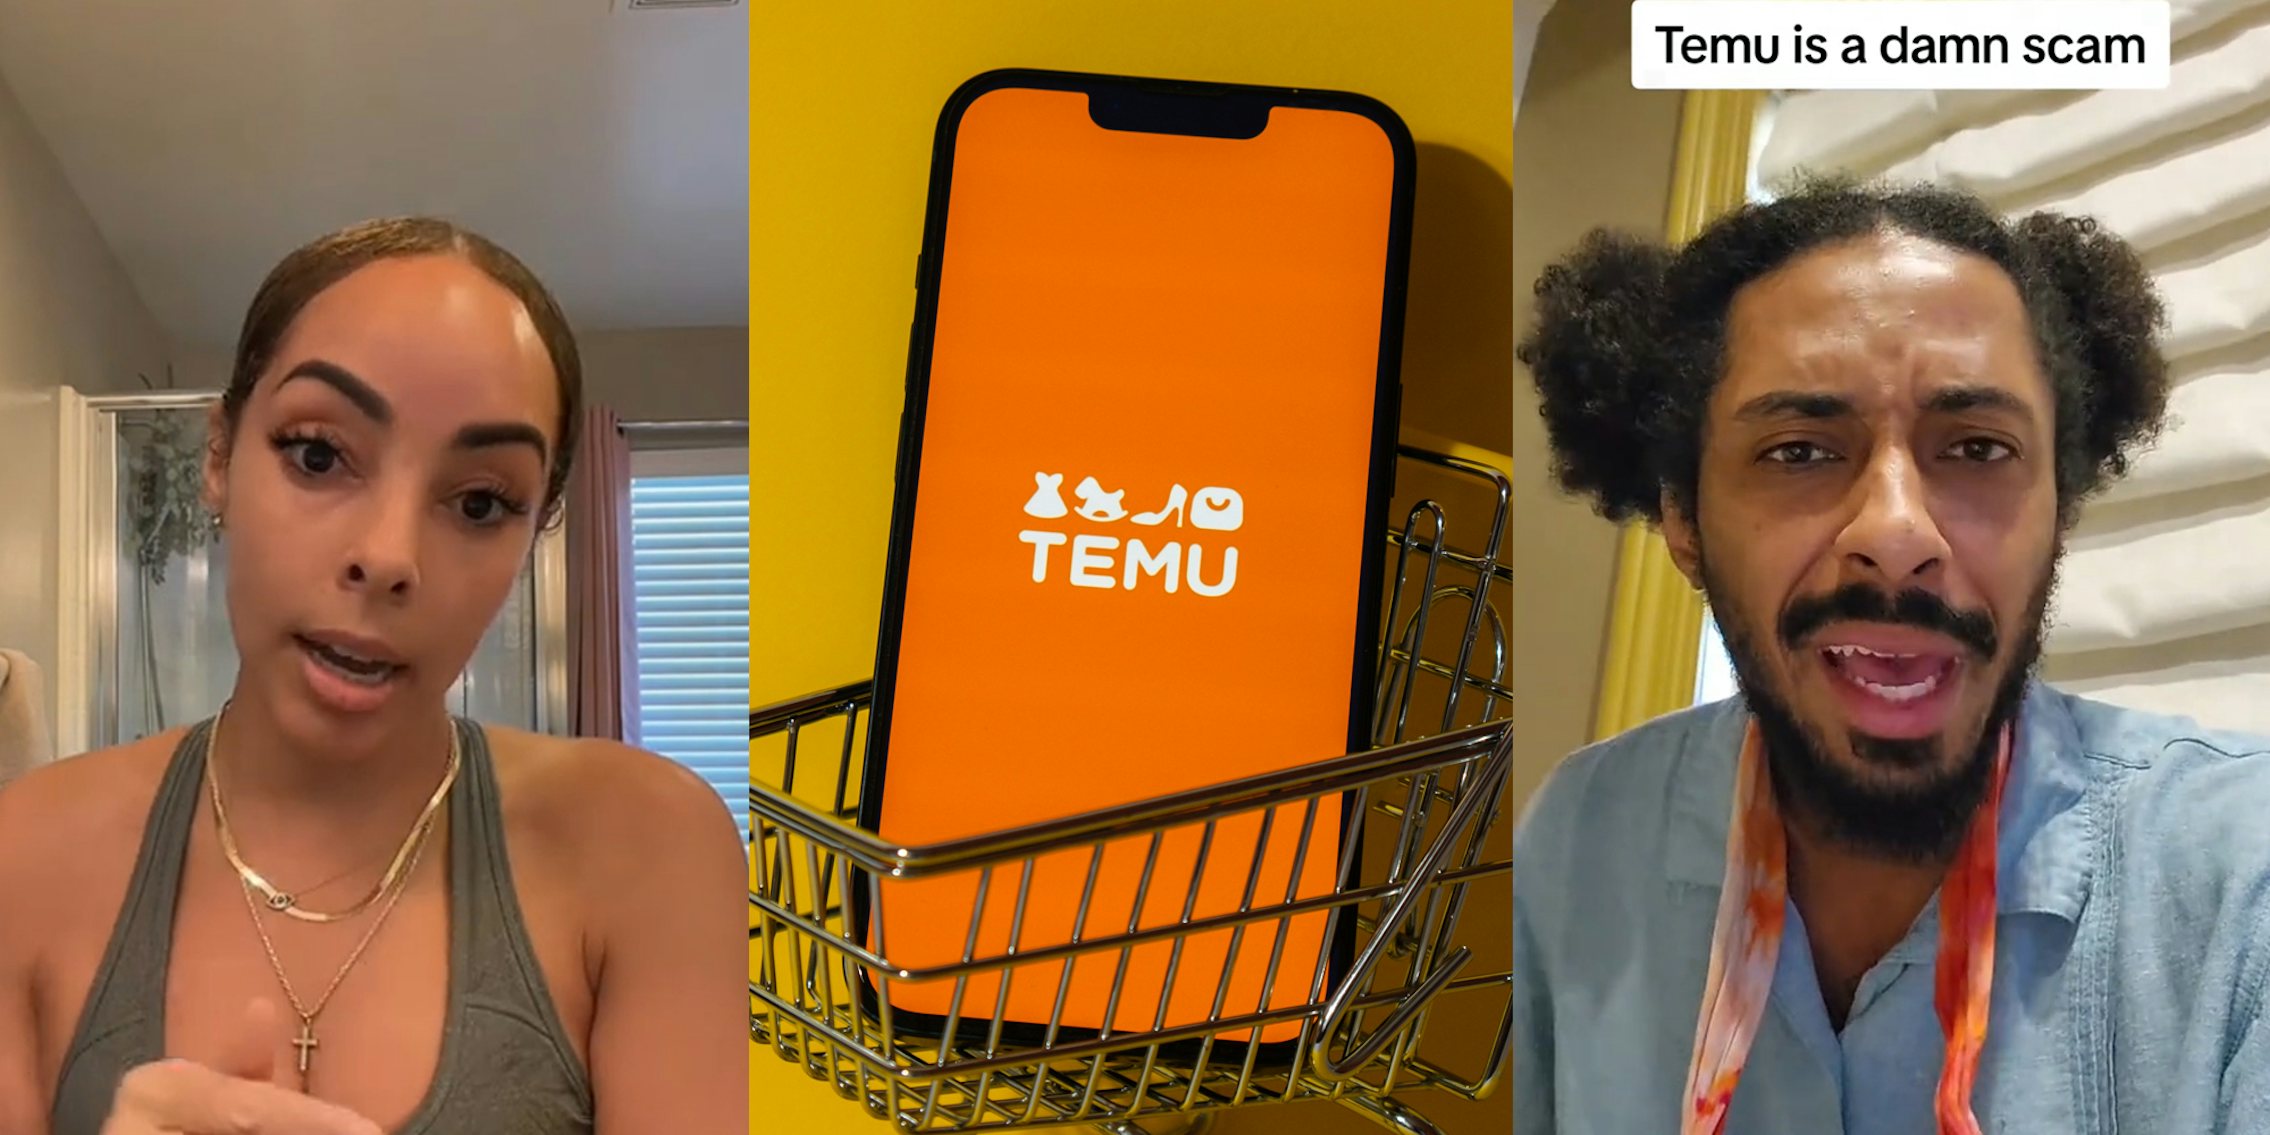 Temu customer speaking (l) Temu app on phone screen in shopping cart in front of yellow background (c) Temu customer's son speaking with caption 'Temu is a damn scam' (r)